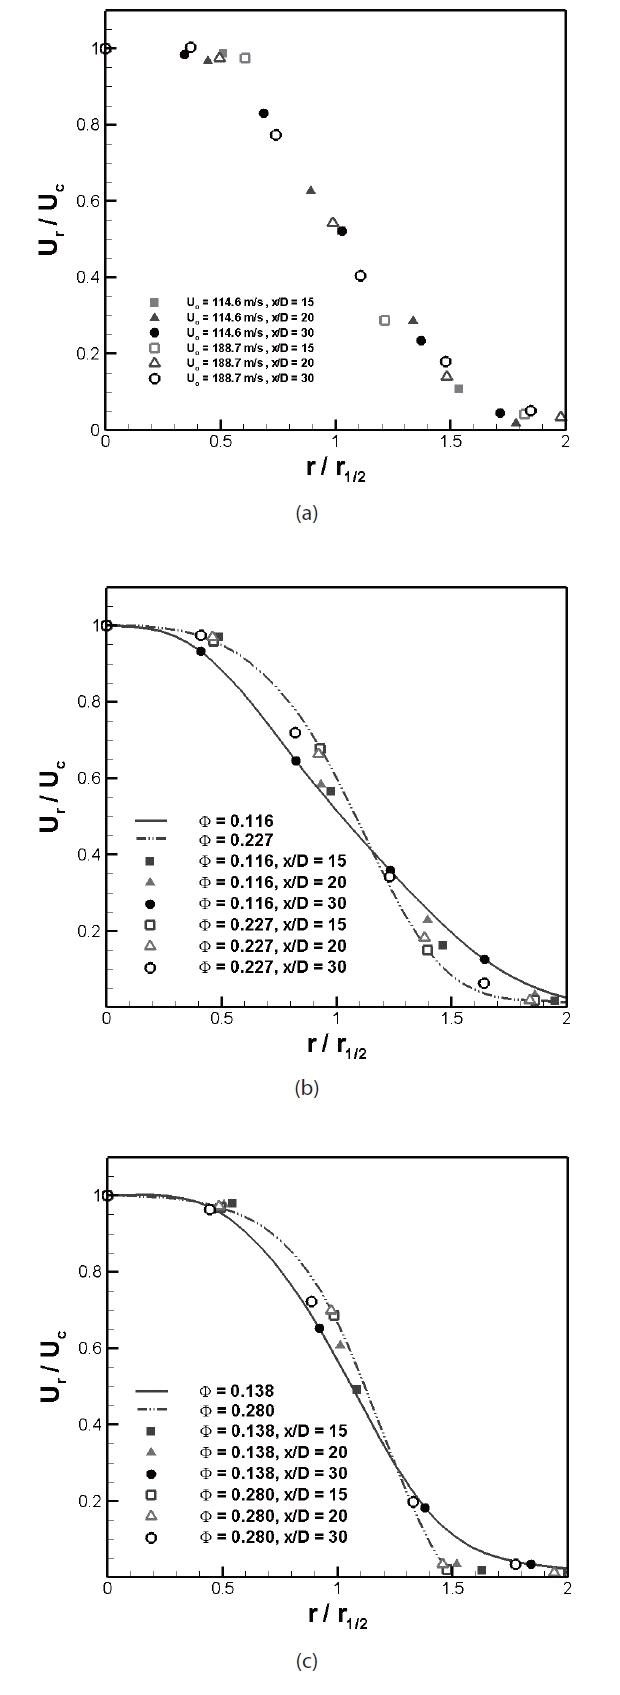 Axial velocity profiles of particle and air along the radial direction.(a) Air. (b) Particles Uo = 114.6 m/s. (c) Particles Uo = 188.7m/s.